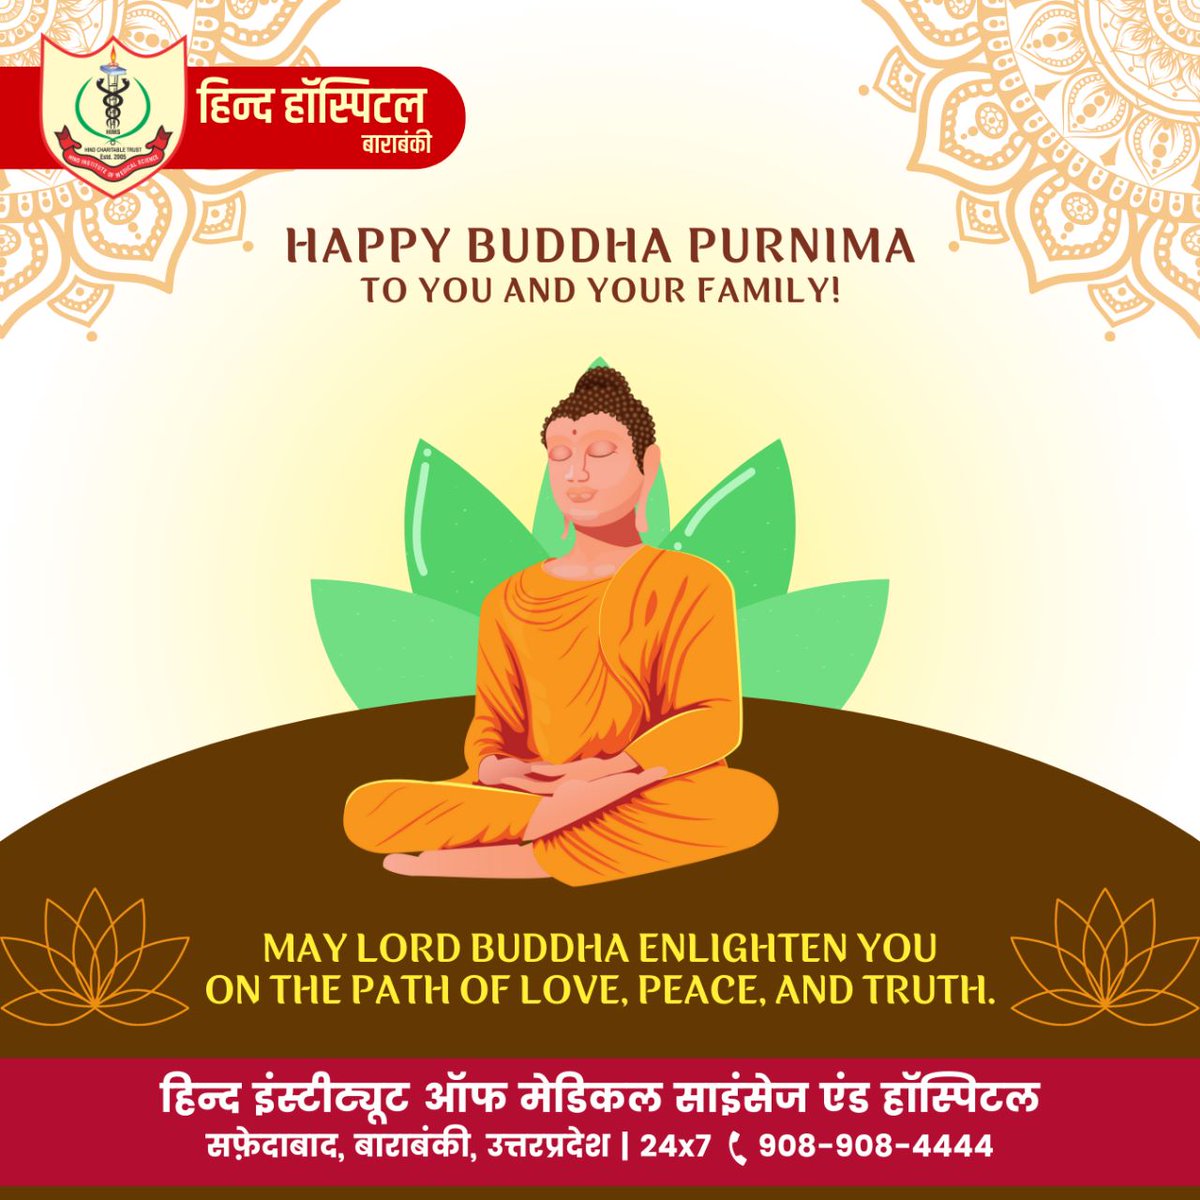 May Lord Buddha enlighten you on the path of love, peace, and truth.

Happy Buddha Purnima to you and your family!

#BuddhaPurnima #buddhateachings #buddhaquotes 
#universalpeace #brotherhood #hindhospital